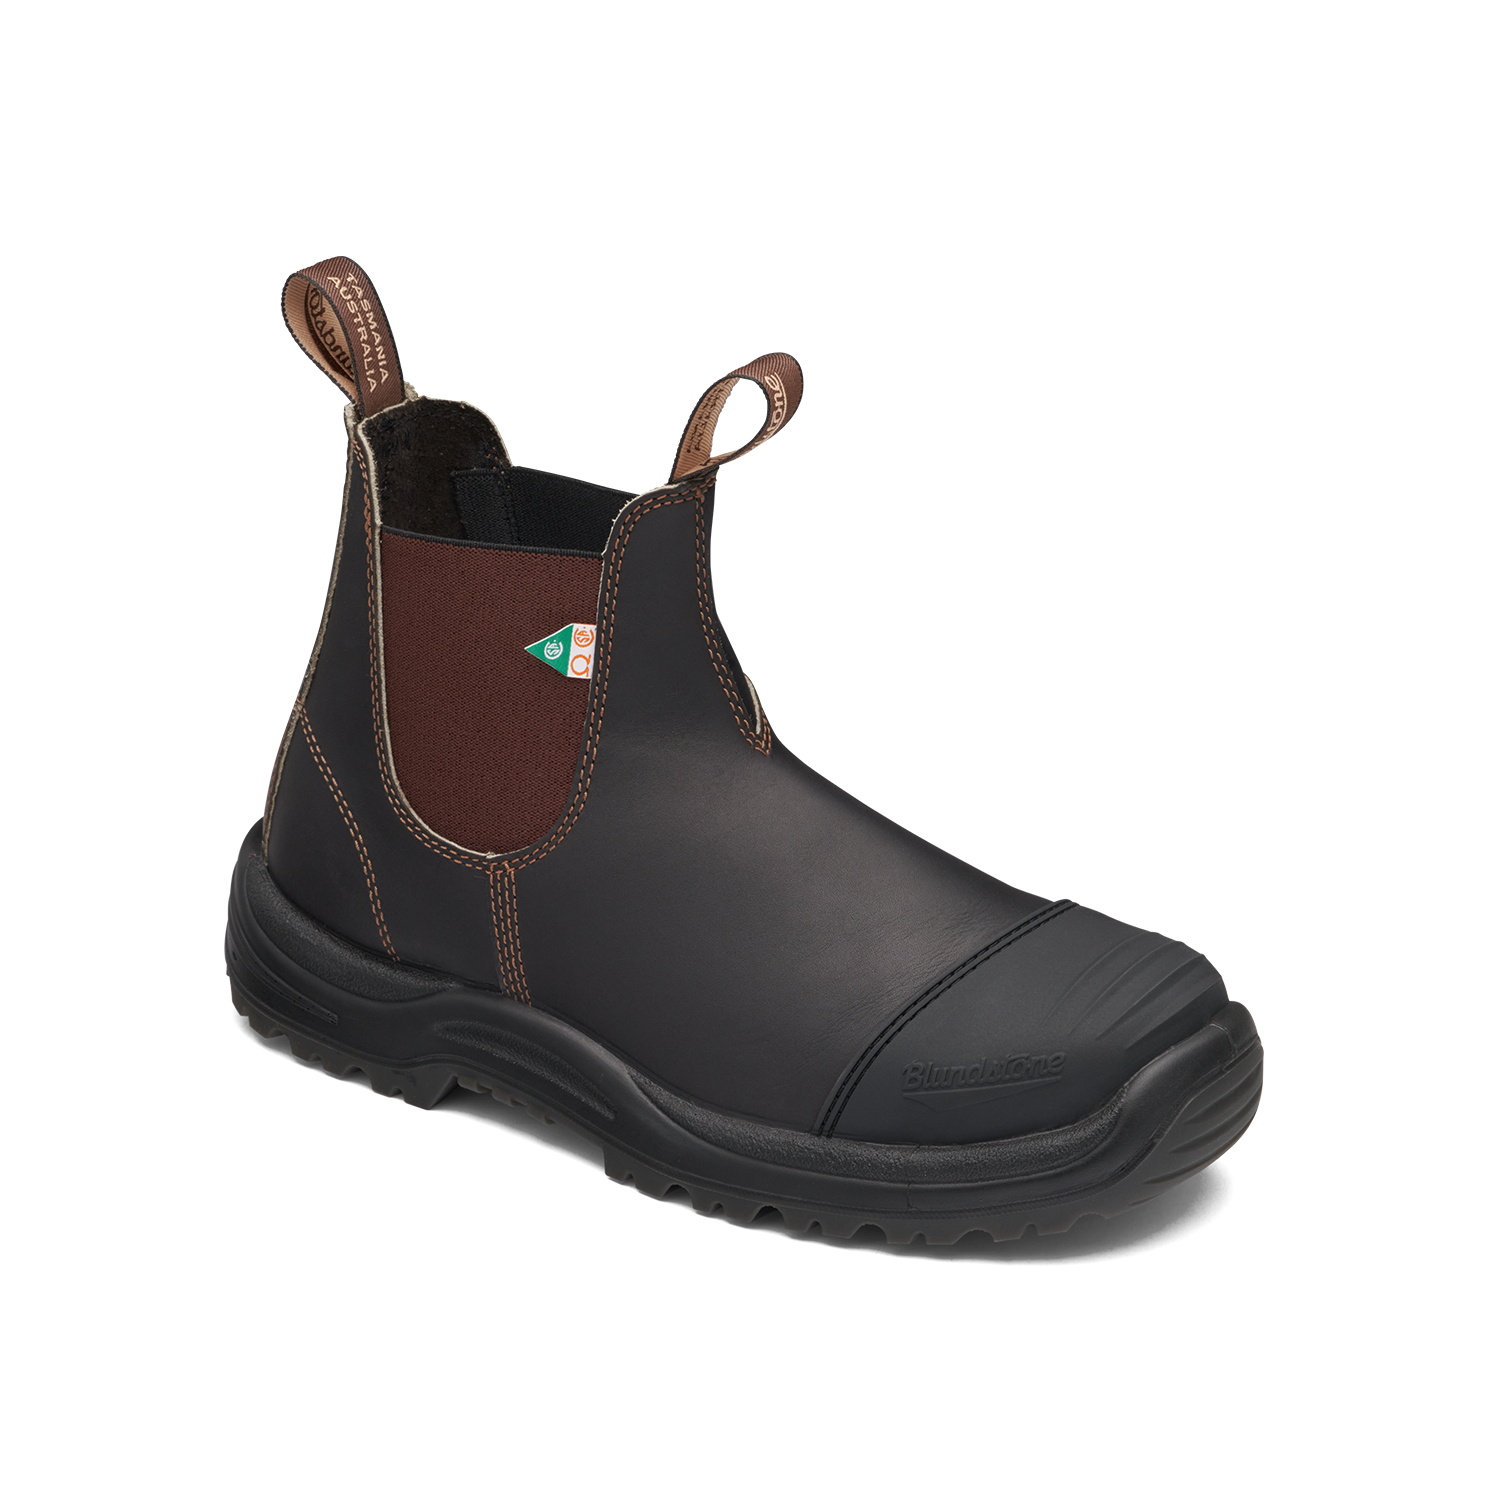 Blundstone 167 Work & Safety Boot Rubber Toe Cap Stout Brown